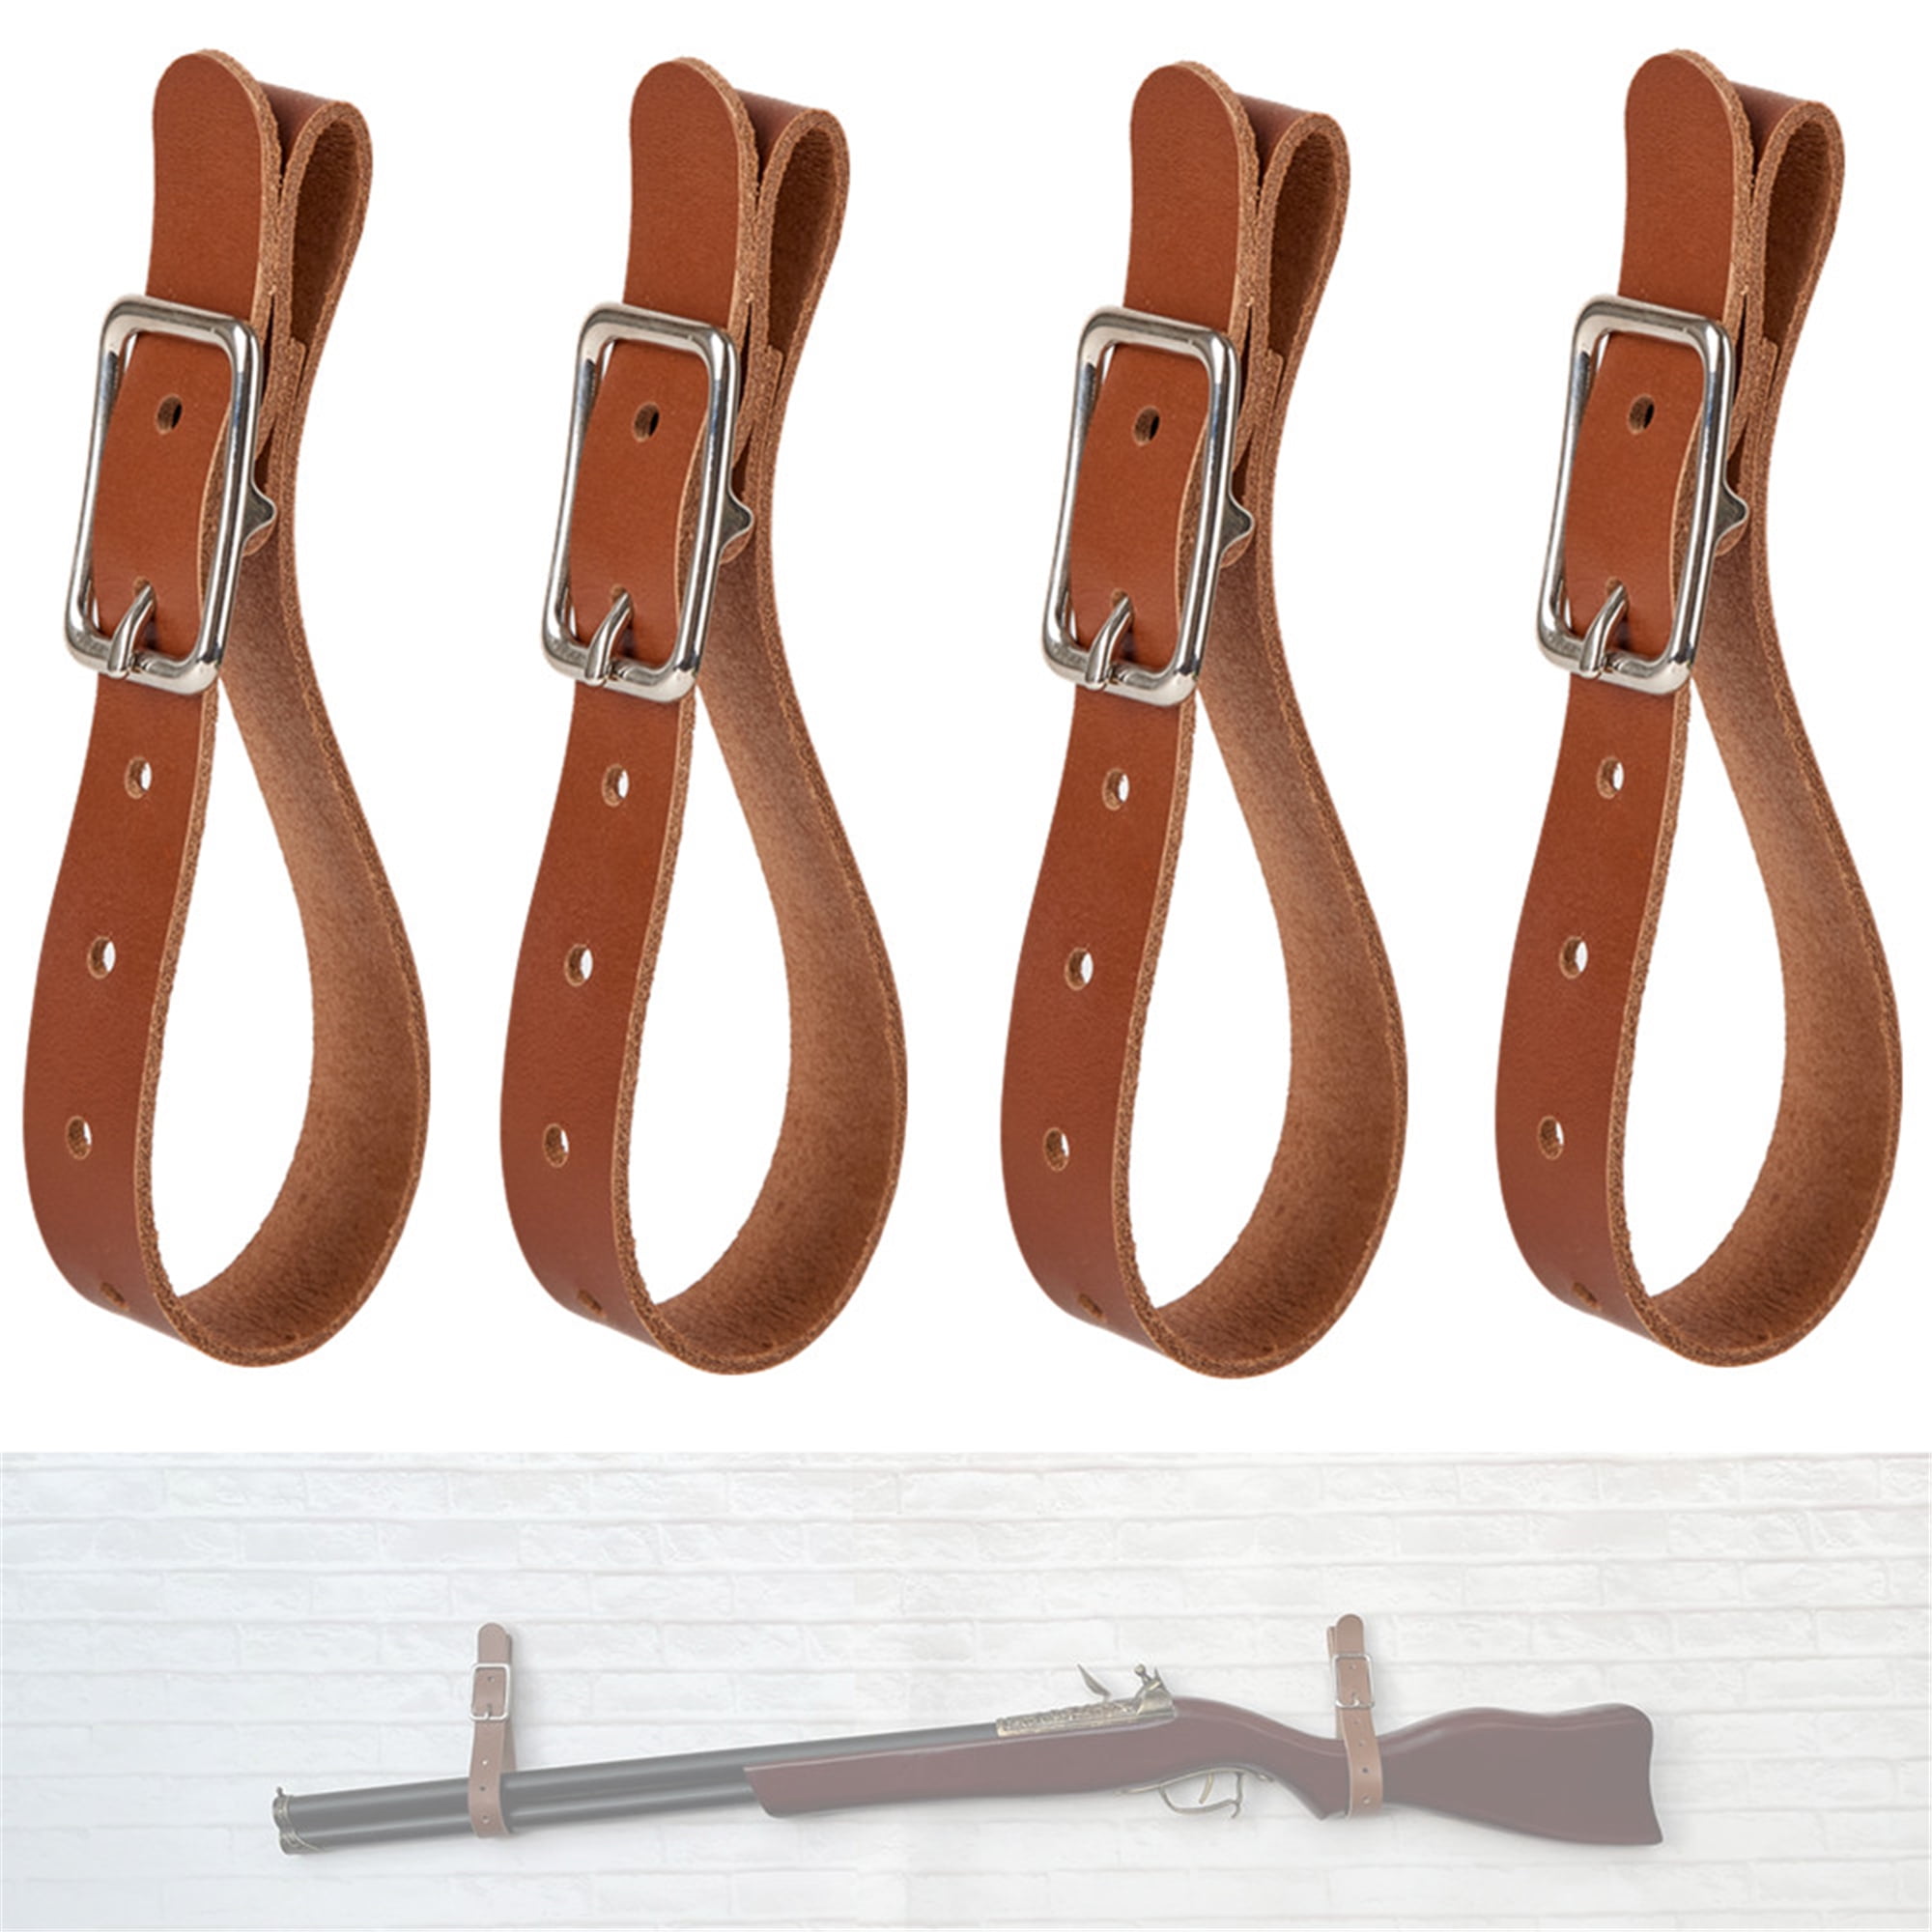 Hide & Drink, Thick Leather Wall Straps for Axes, Hatchets & Tools, Garage Organizer, Accessories, Handmade Includes 101 Year Warranty :: Bour